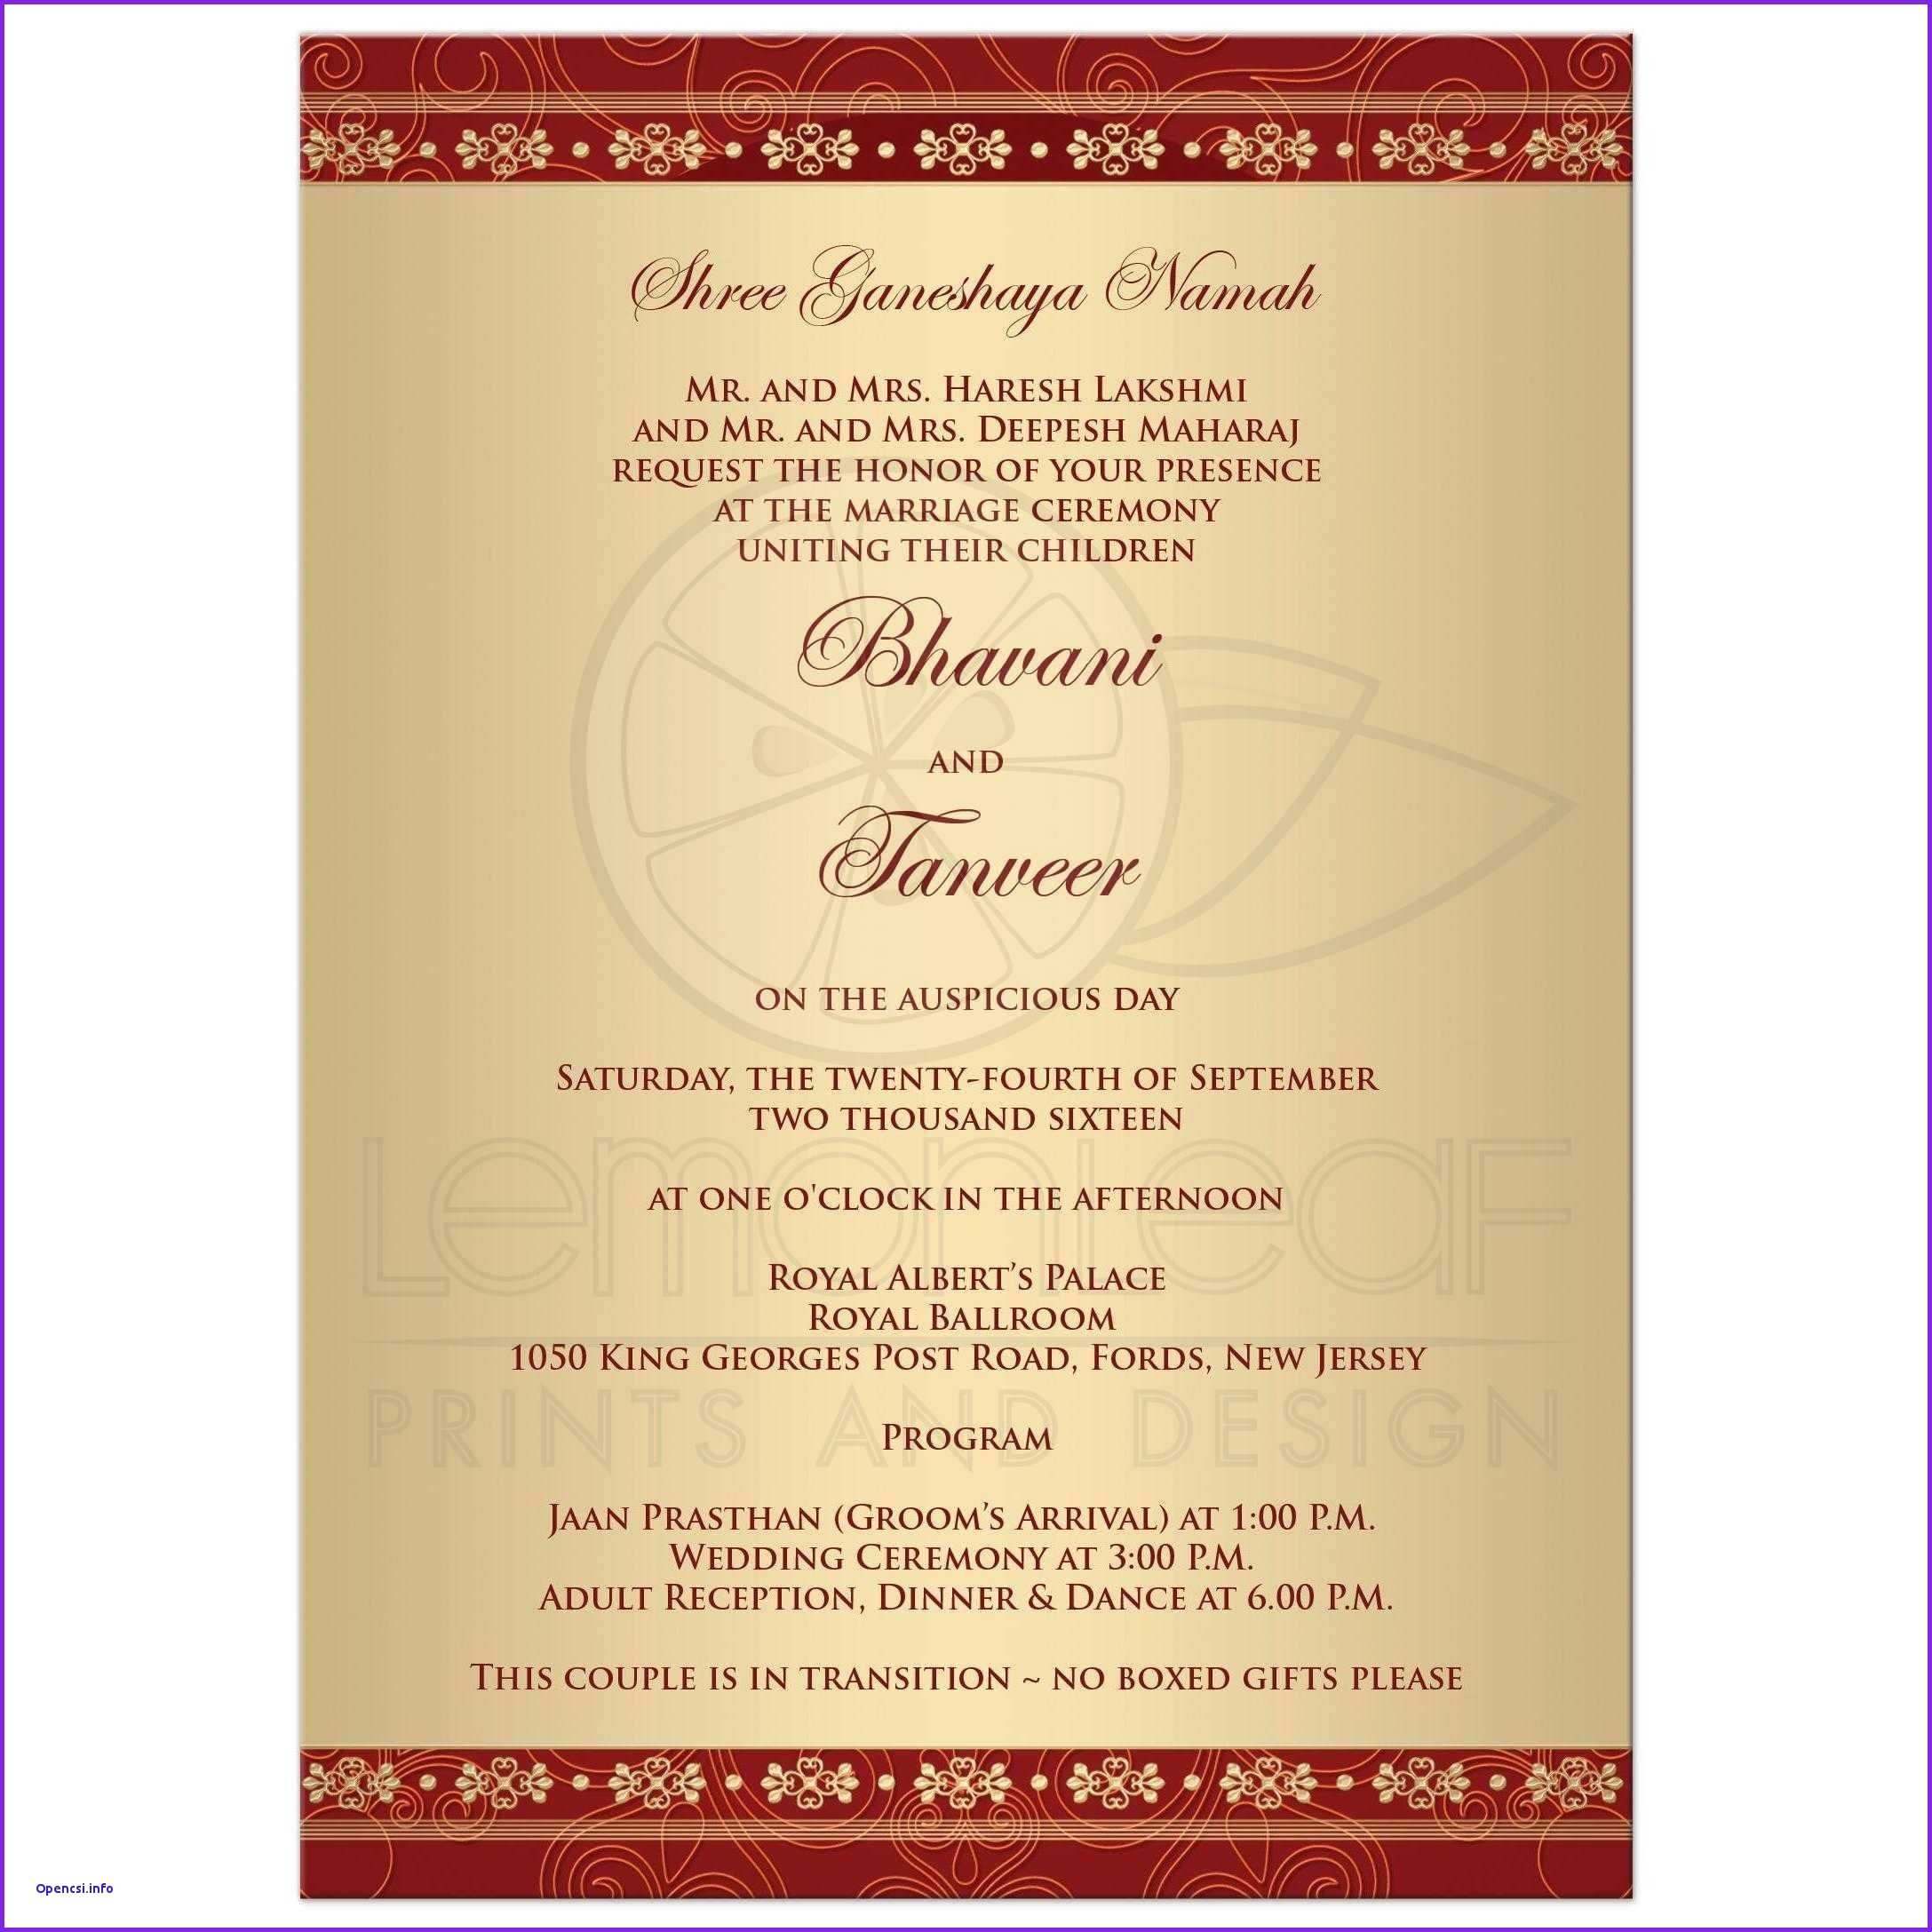 35 Online Invitation Card Format For Marriage Photo for Invitation Card Format For Marriage